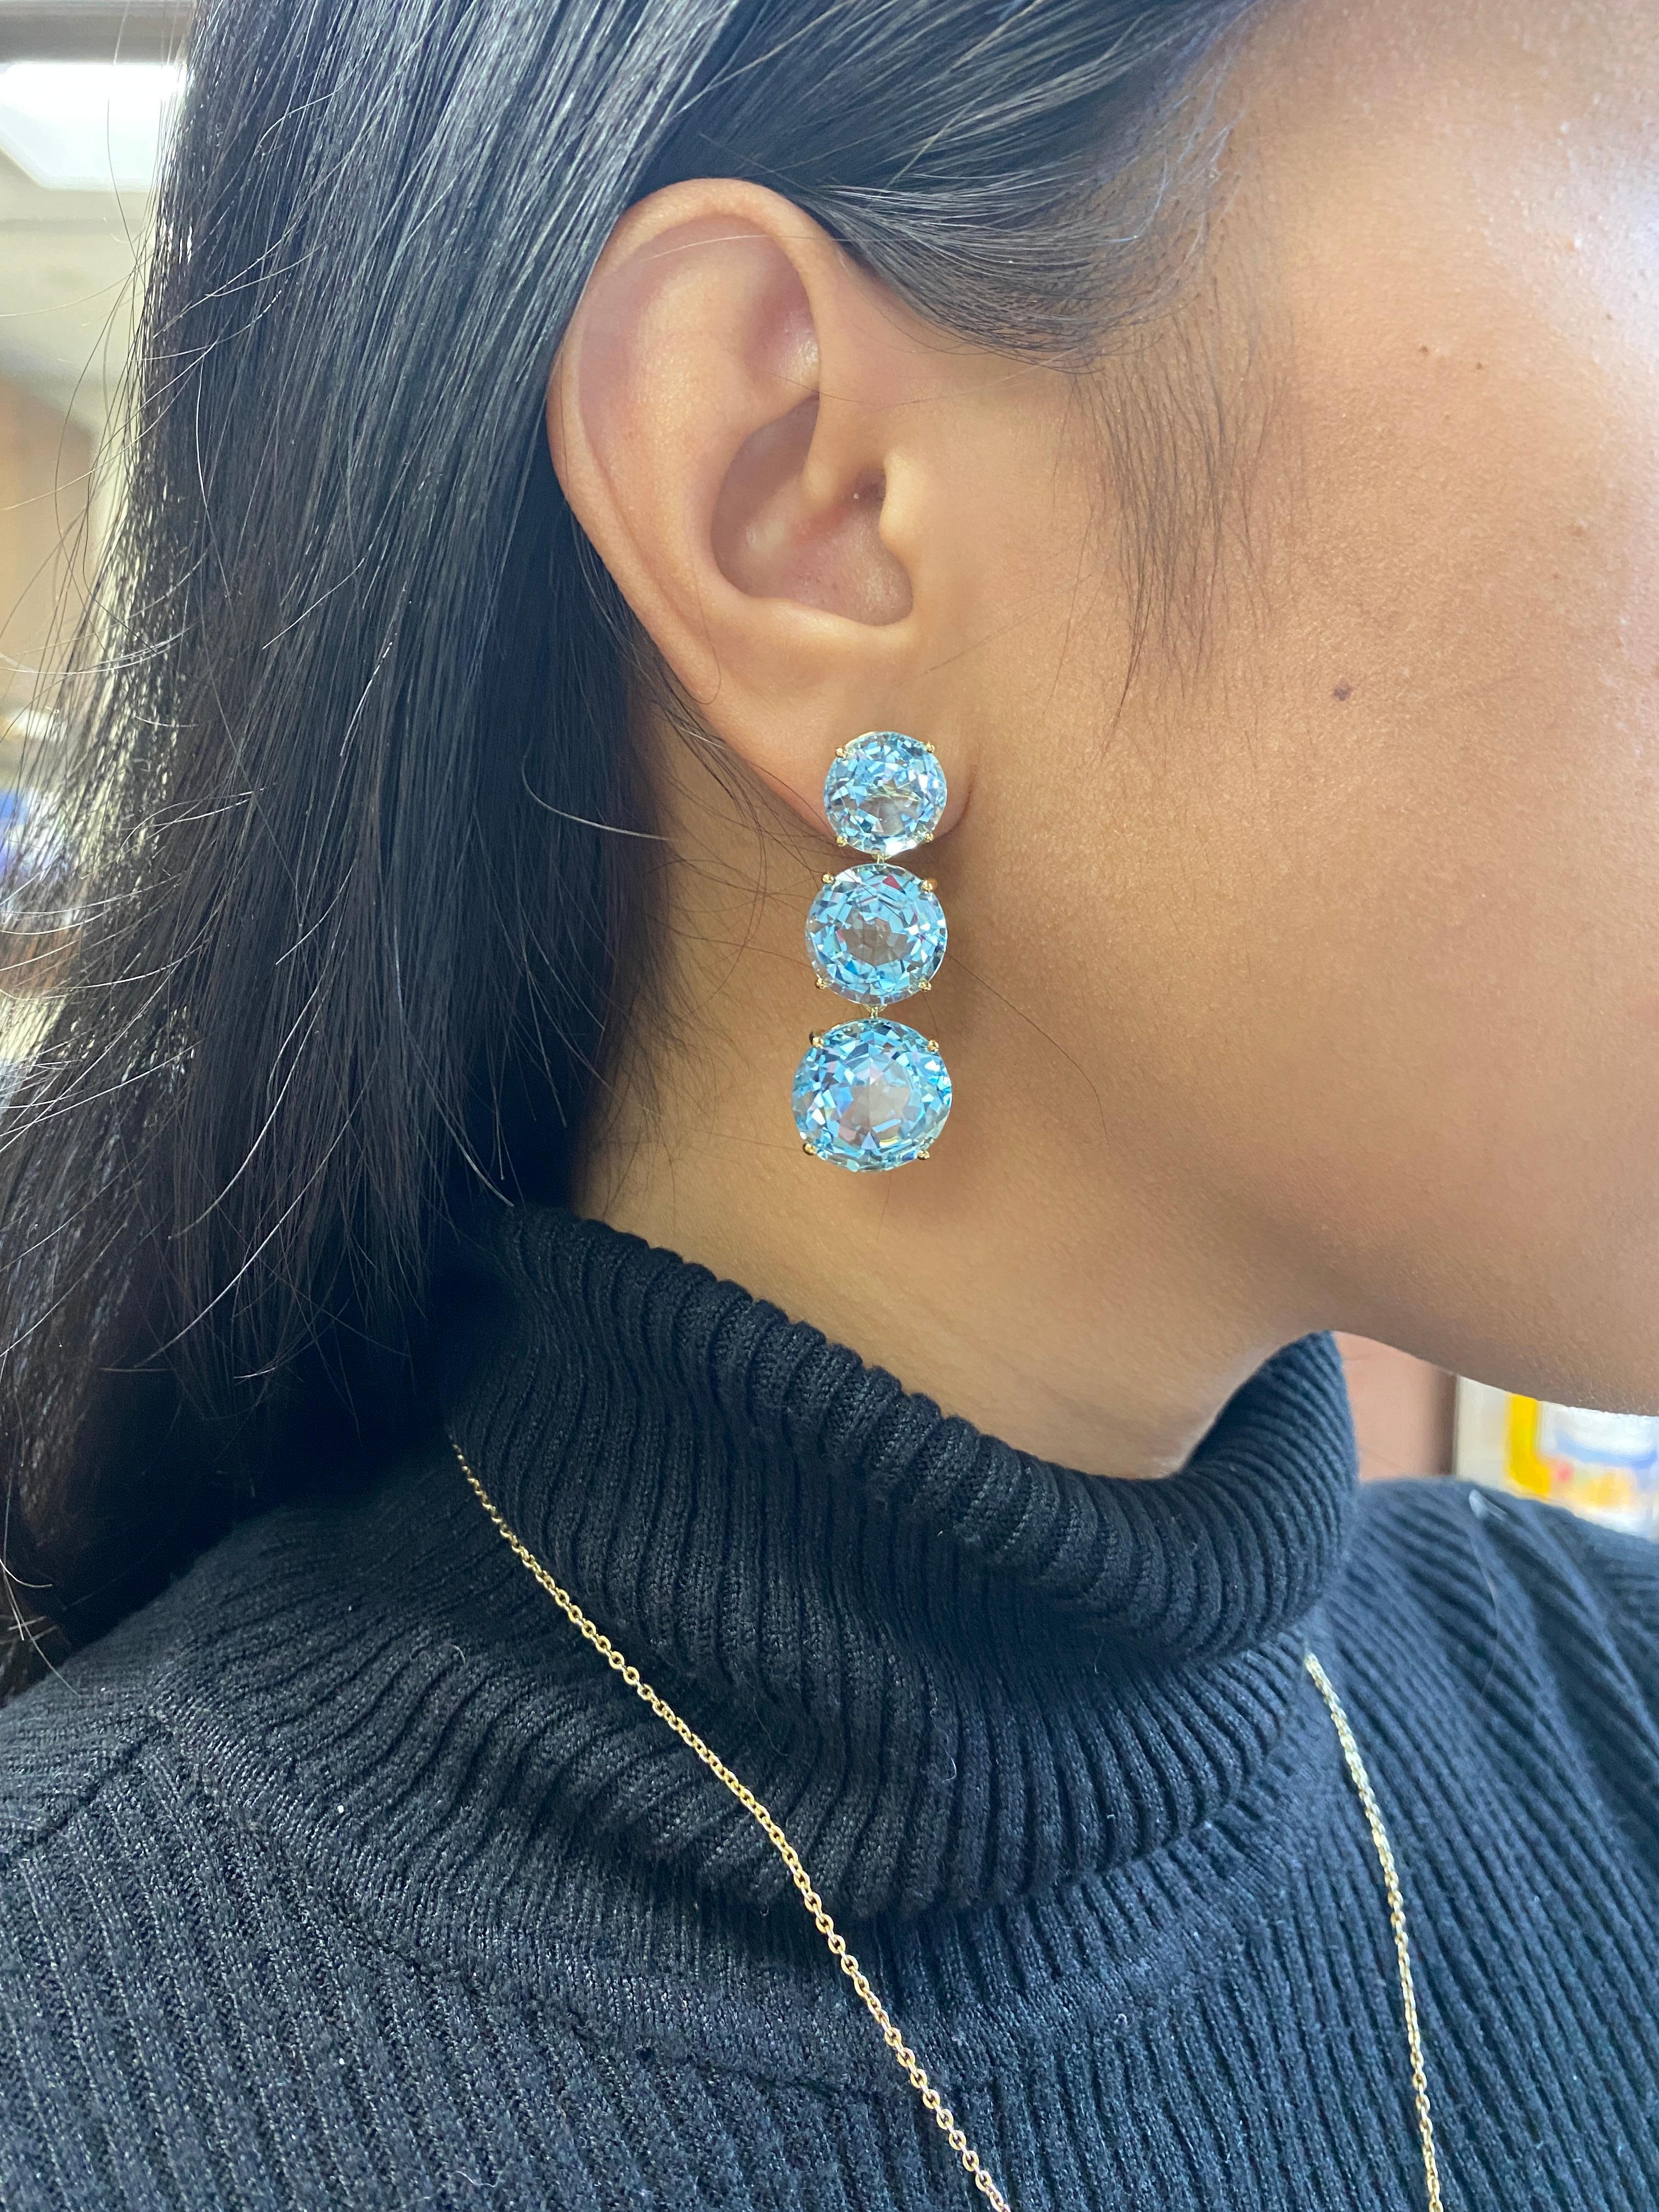 3 Tier Round Faceted Blue Topaz Earrings in 18k Yellow Gold, from ‘Gossip' Collection.  Like any good piece of gossip, this piece carries a hint of shock value.

* Gemstone size: 15, 13 & 11 mm
* Gemstone: 100% Earth Mined 
* Approx. gemstone